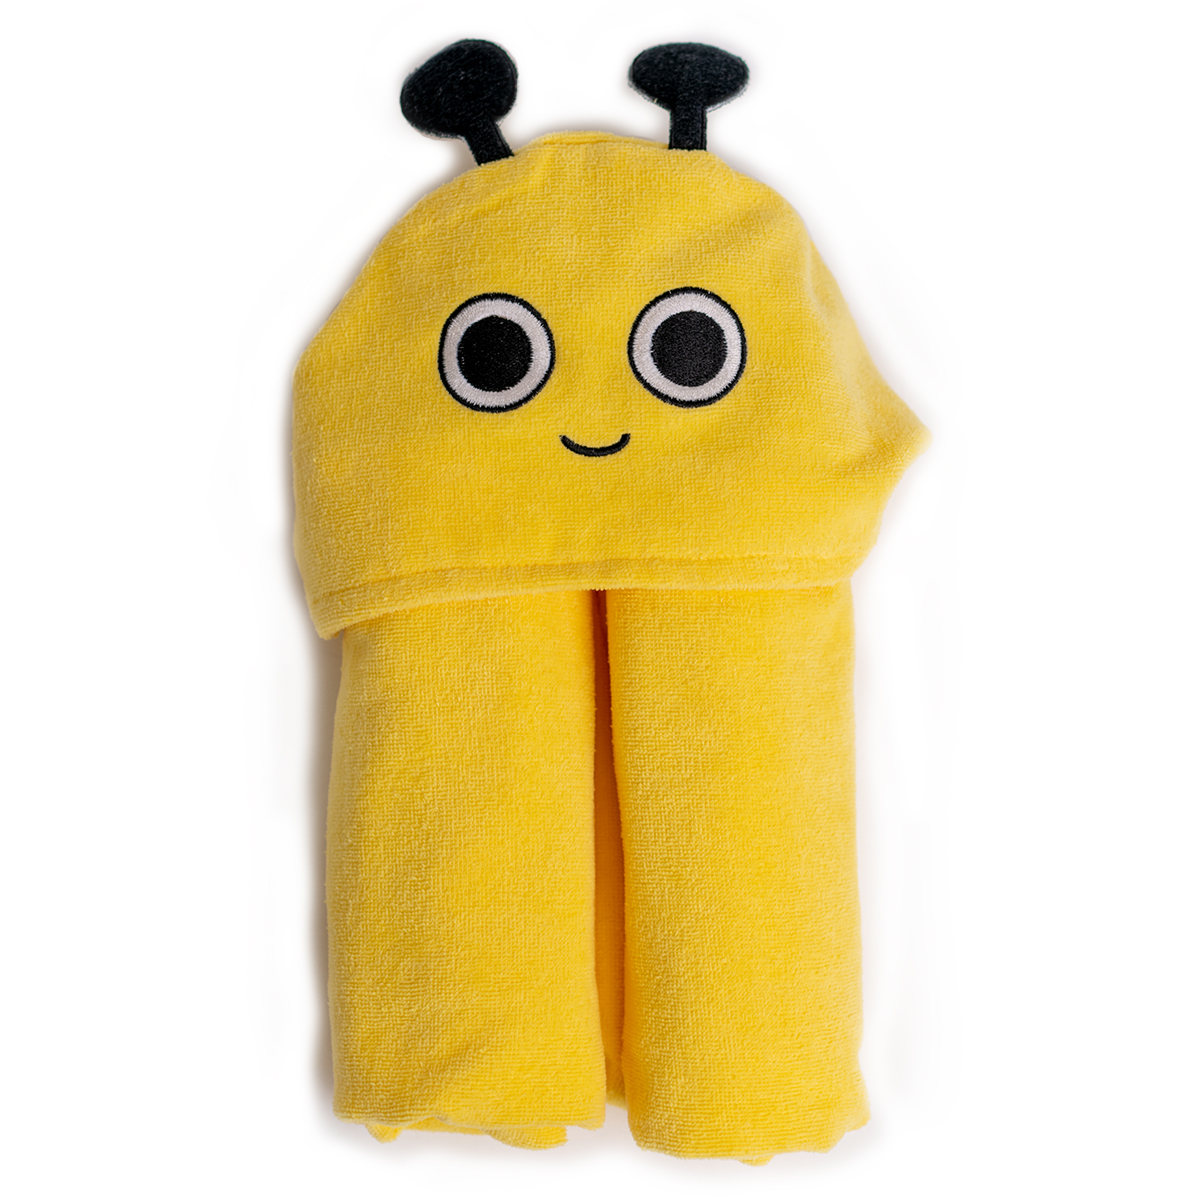 Milk&amp;Moo Buzzy Bee Baby Bath Towel, 100% Cotton Baby Hooded Towel, Ultra Soft and Absorbent Baby Towel for Newborns, Infants and Toddlers, XL Size, Yellow Color